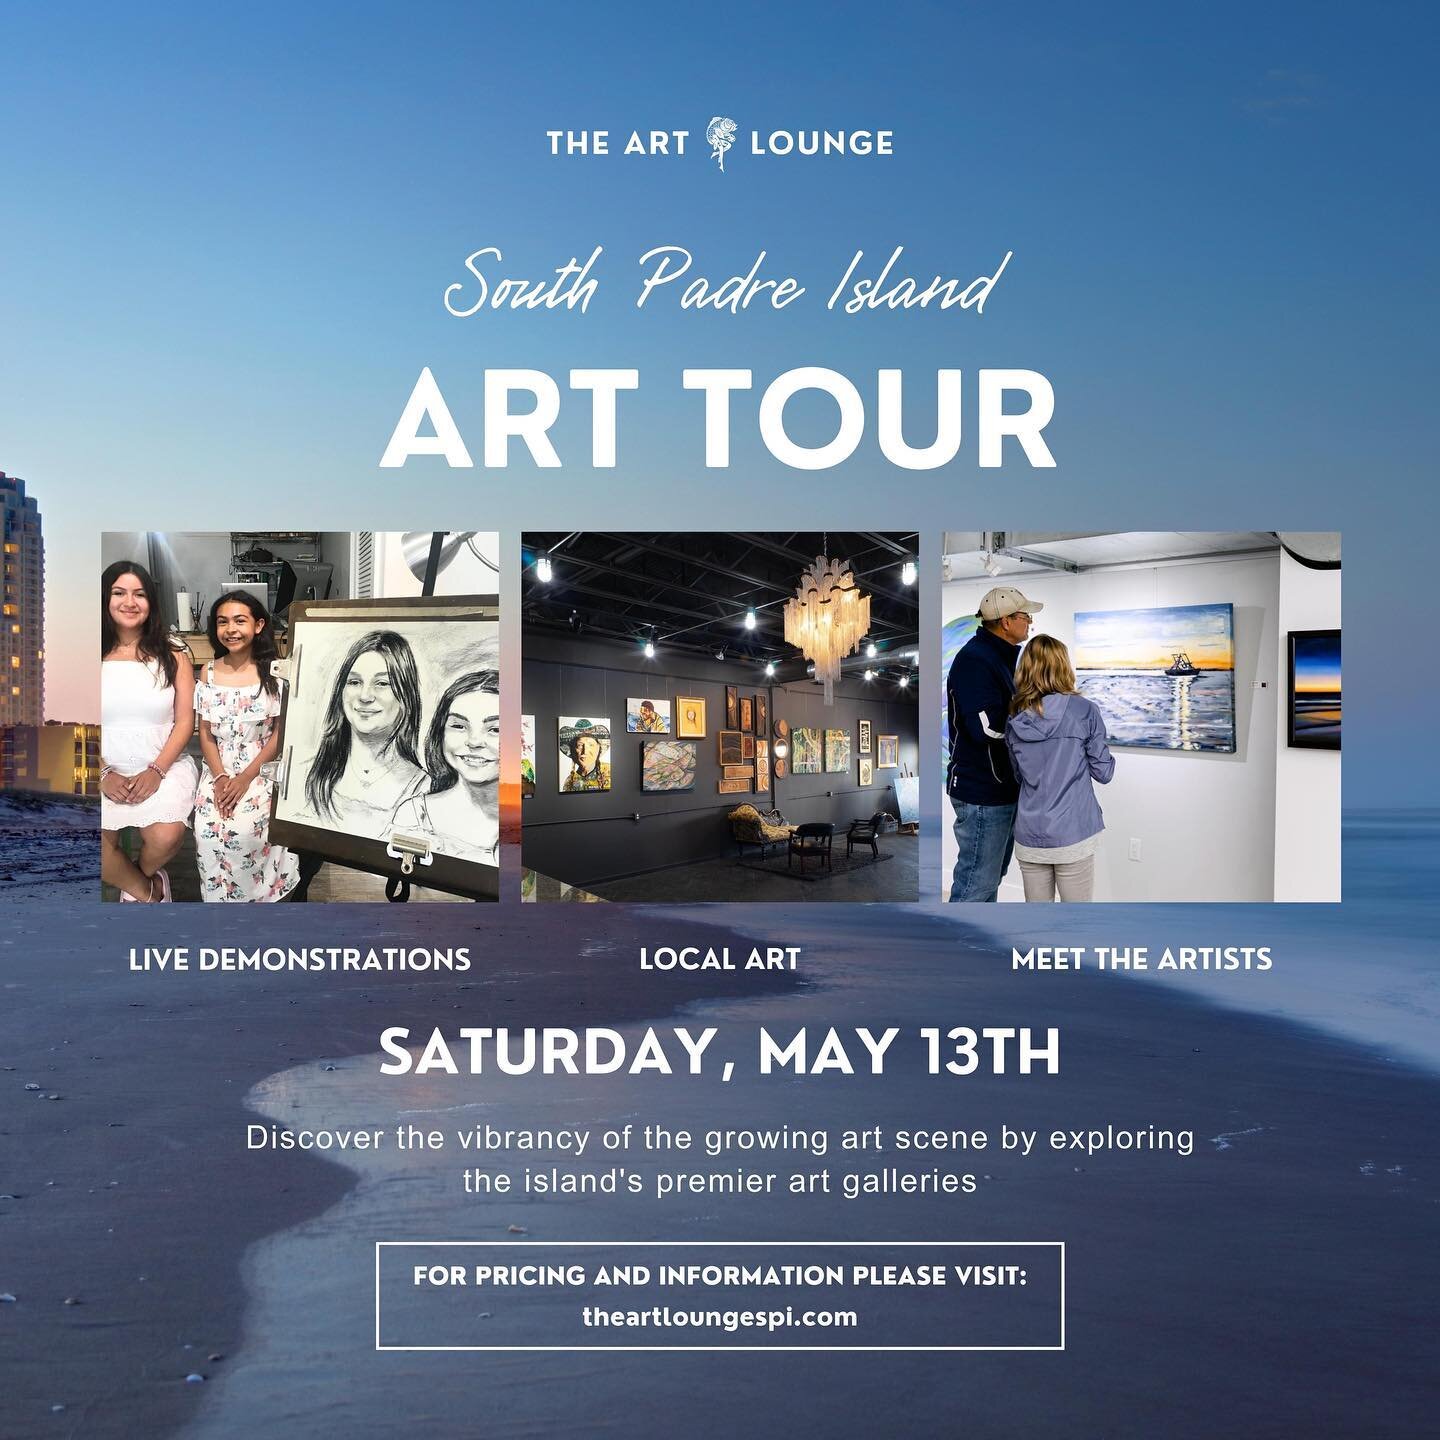 South Padre Island ART TOUR 🖼️ 
On Saturday, May 13th, discover the vibrancy of the growing art scene on South Padre Island 🏝️ 

Explore 3 art galleries, each filled with its own unique artworks from local artists. From painters to ceramicists, woo